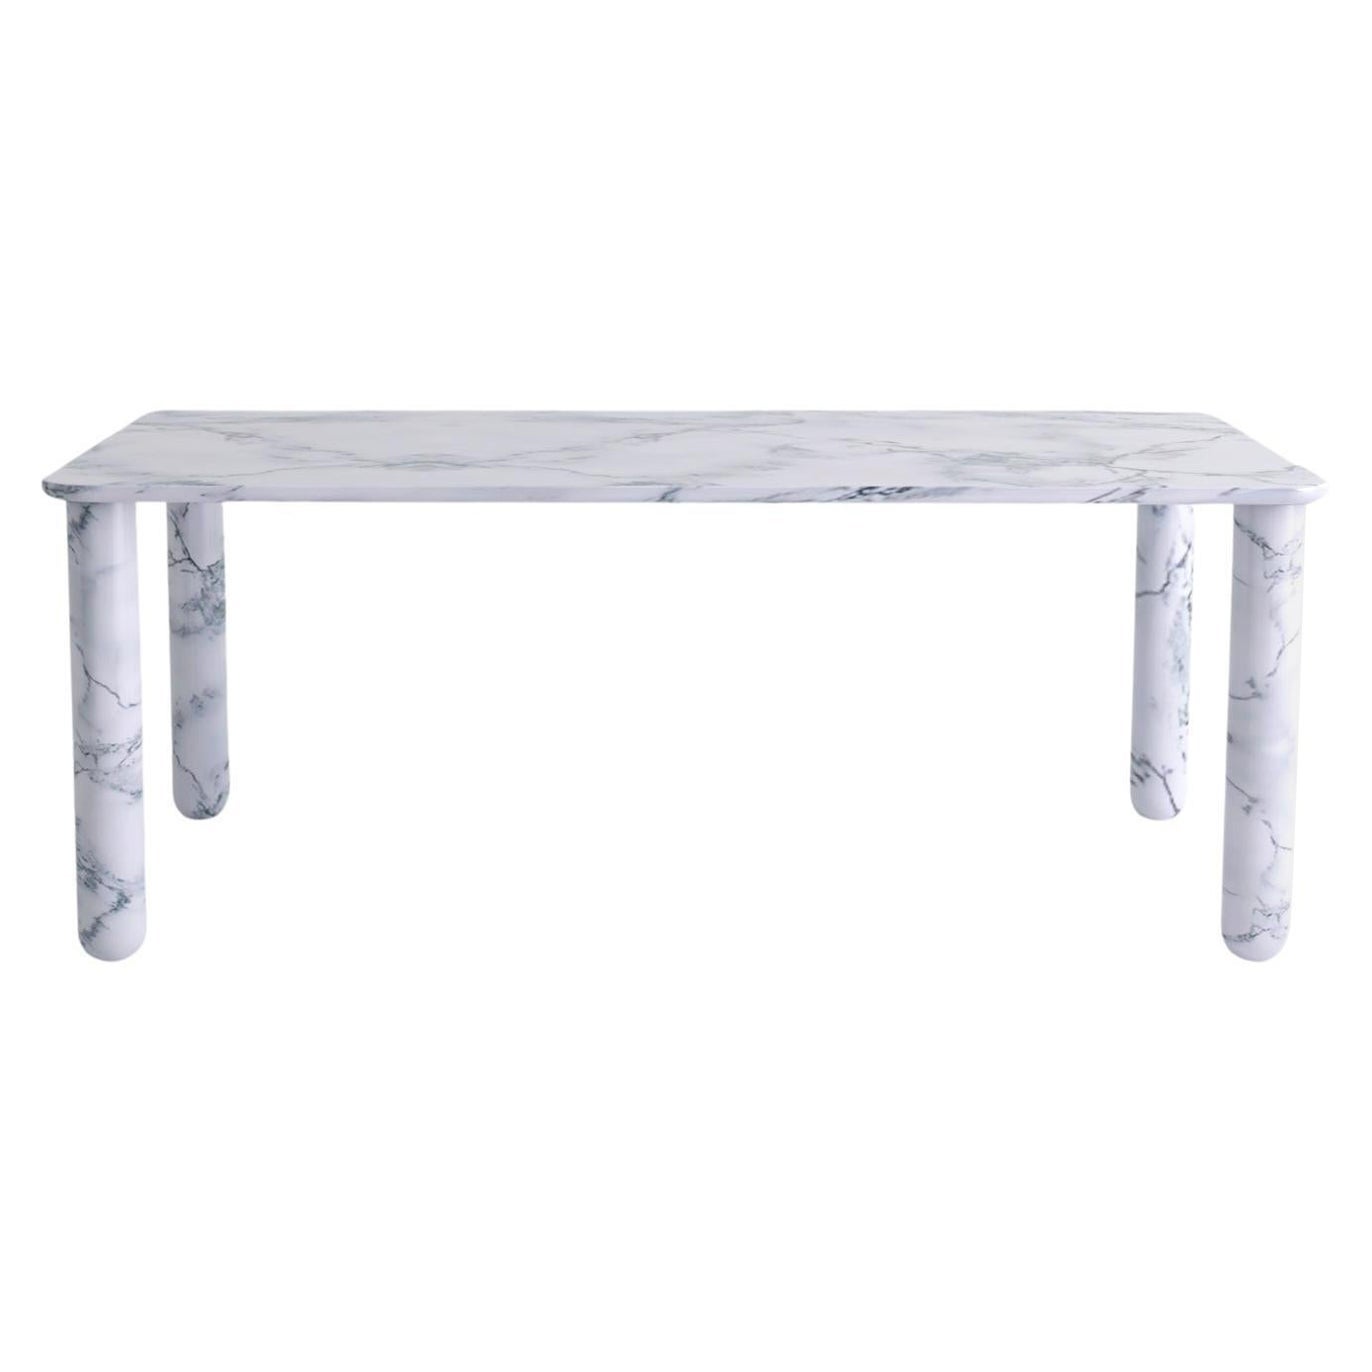 X Large White Marble "Sunday" Dining Table, Jean-Baptiste Souletie For Sale